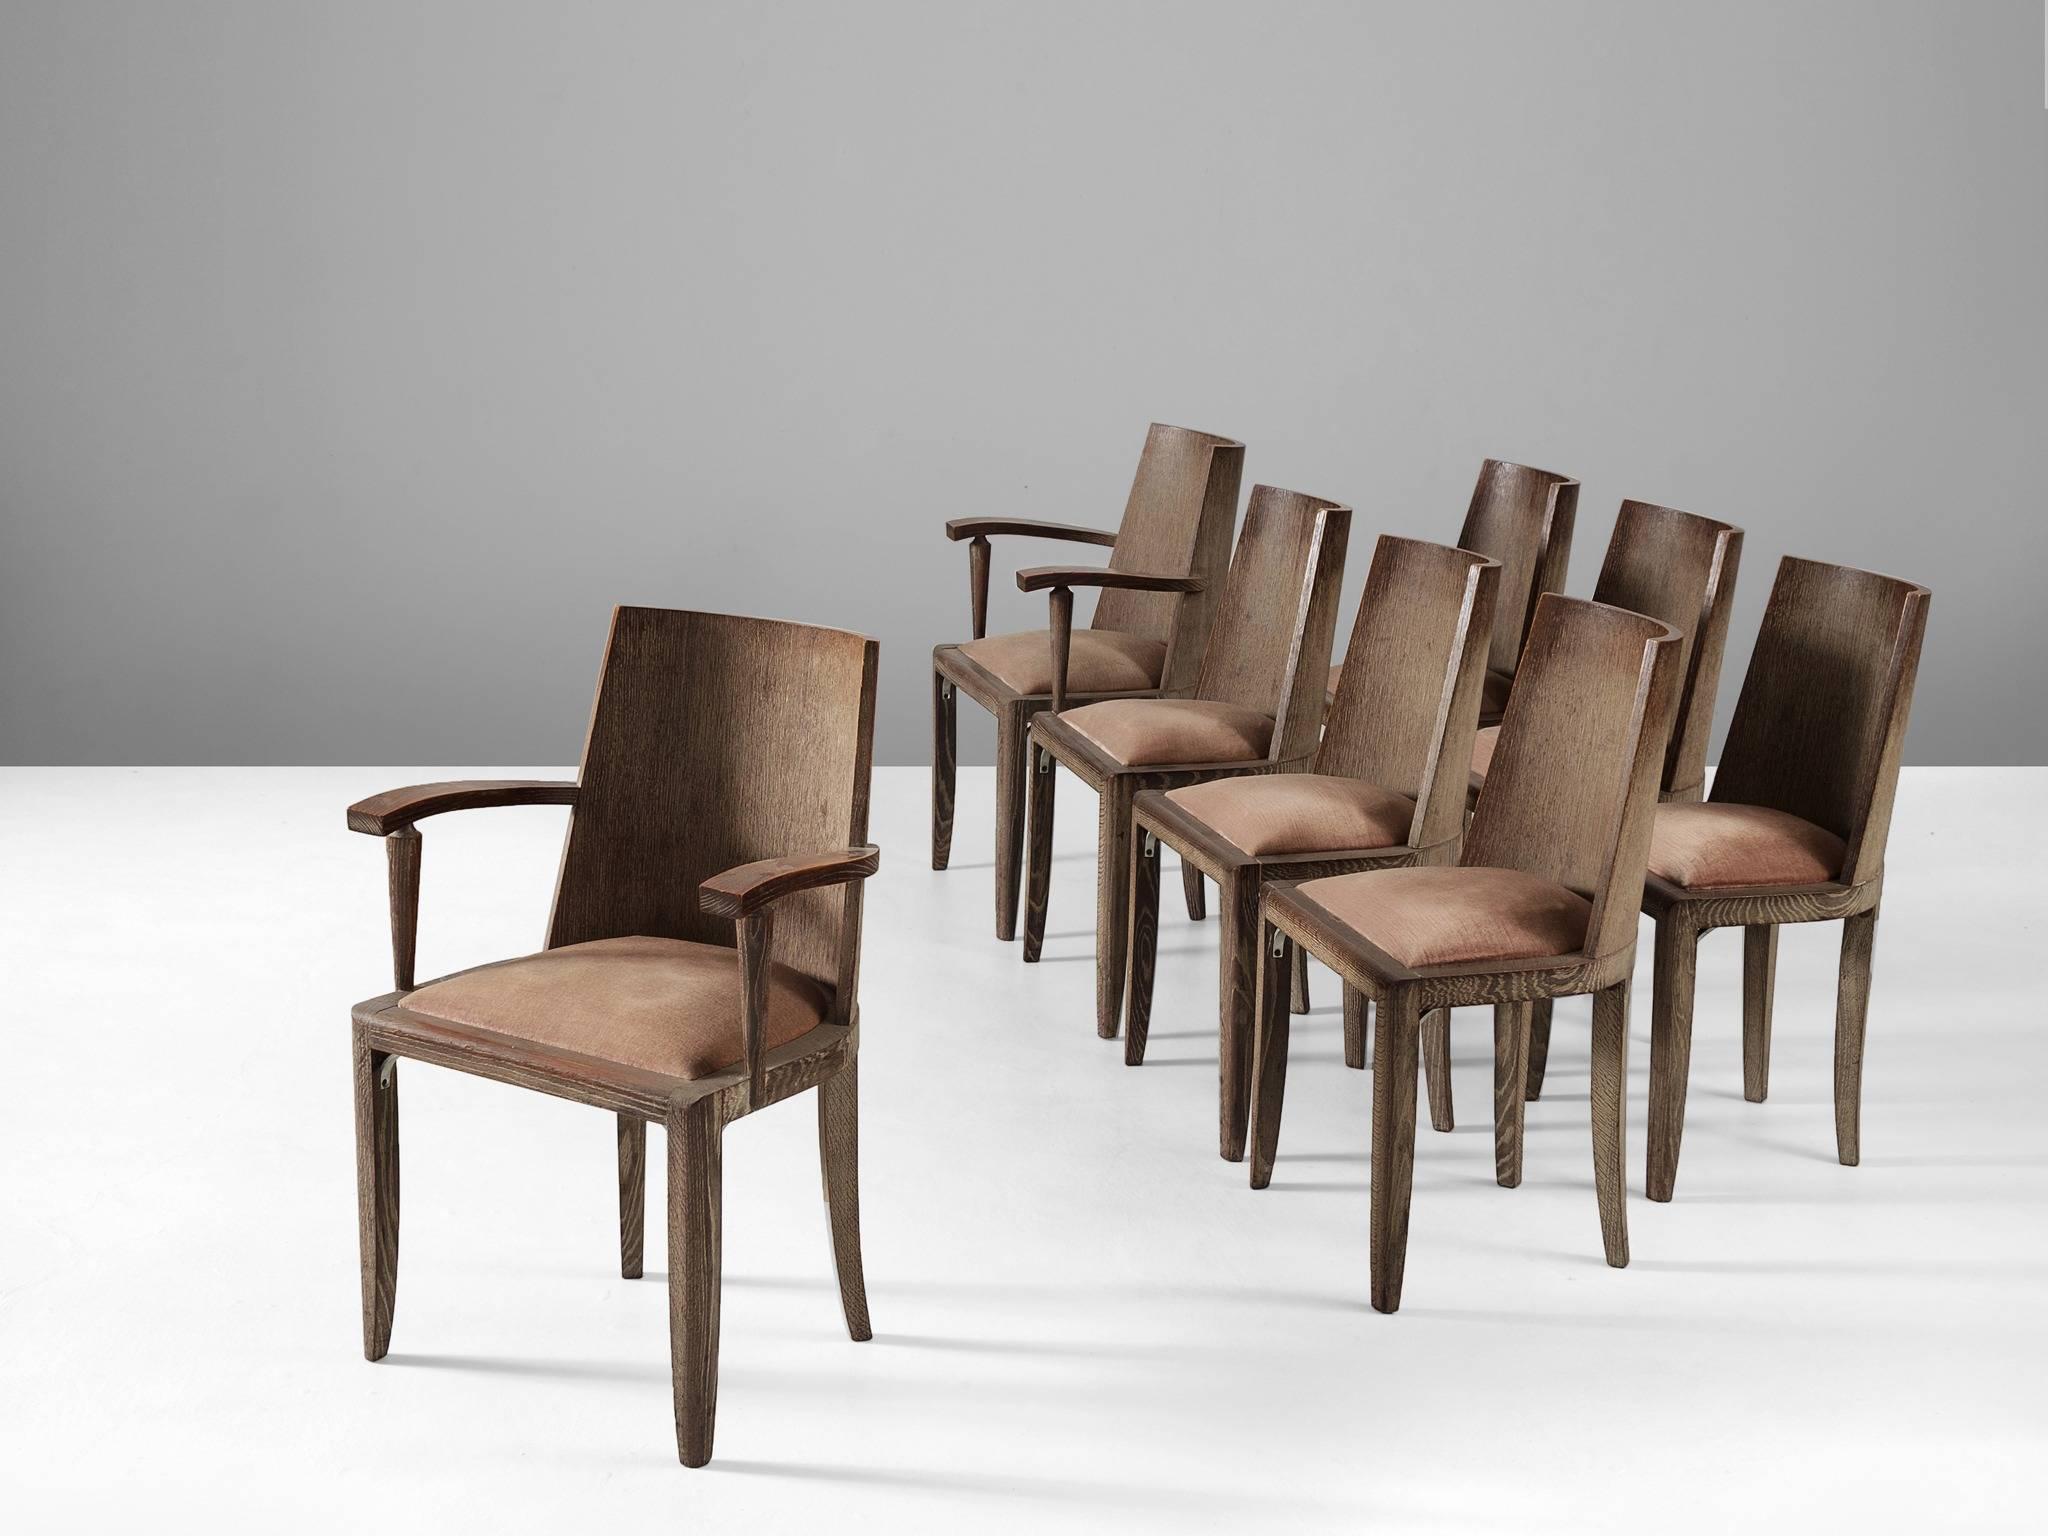 De Coene, set of six chairs, in oak and fabric, Belgium, 1930s. 

Interesting set of six dining chairs. The chairs have an oak frame, four tapered legs, of which the back are sloping. Sturdy large curved back and soft rose upholstery. The curved